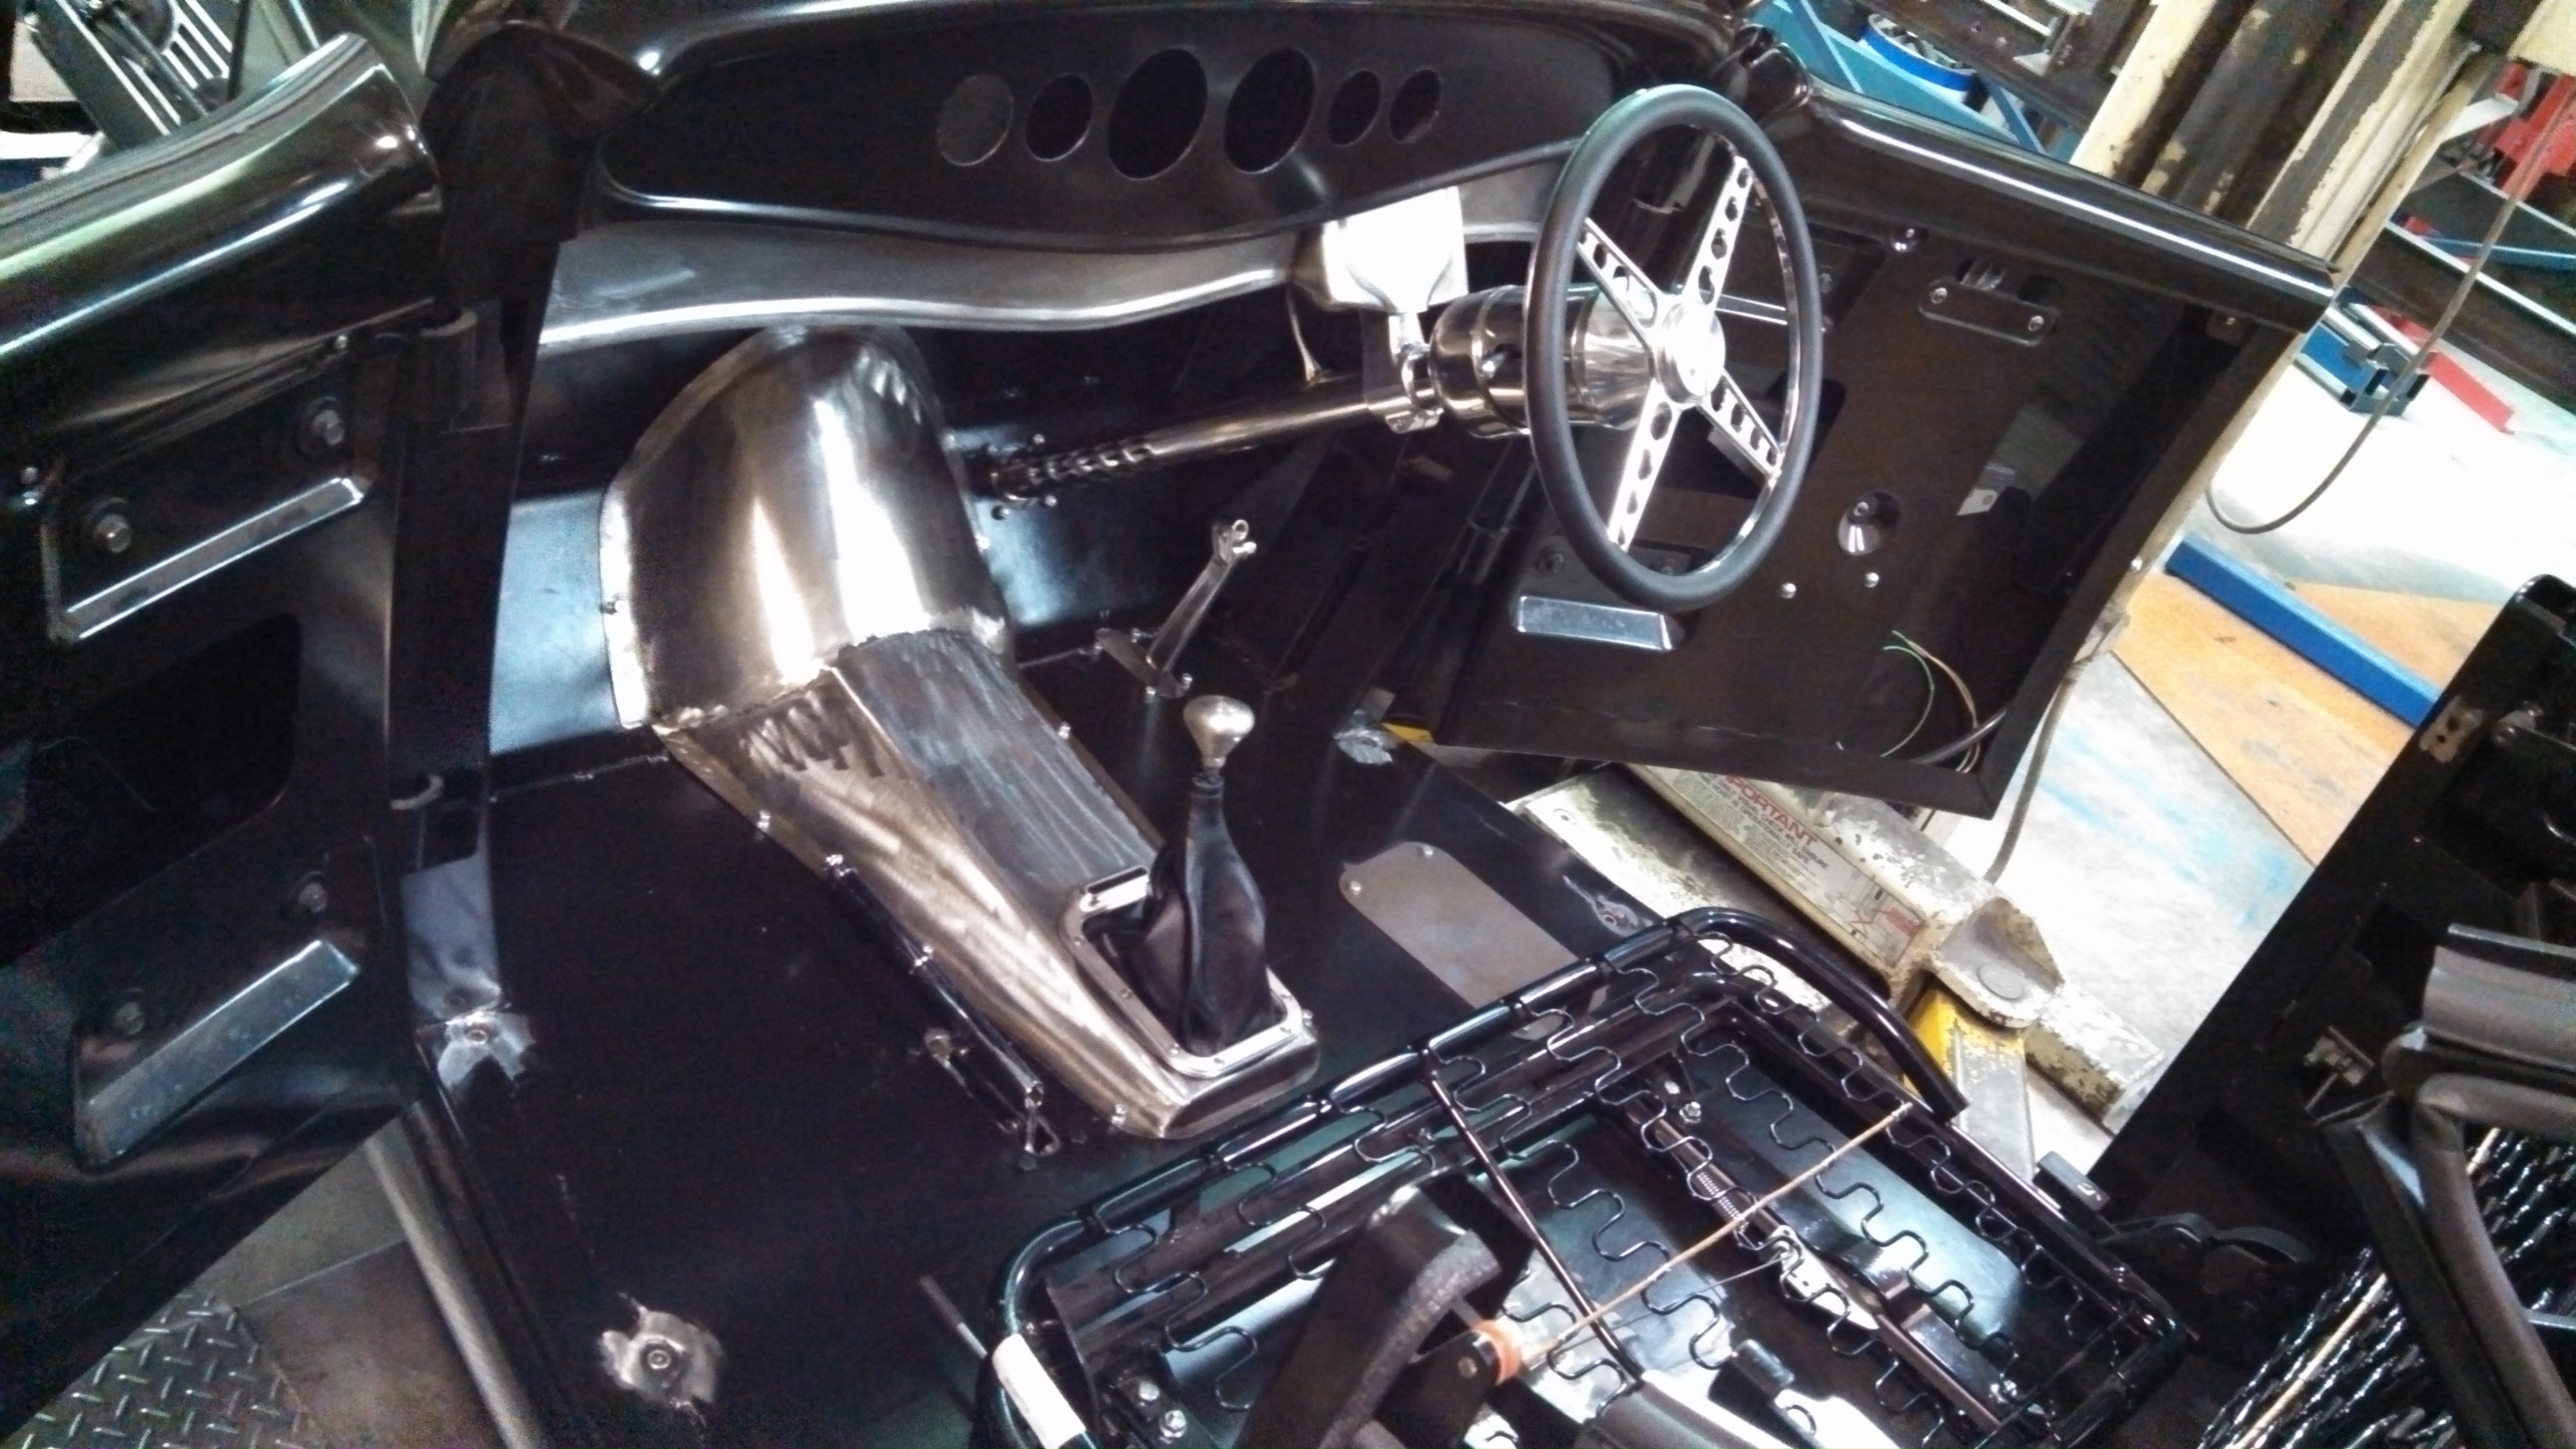 Hot Rod interior fit up, custom dash board panel and trans tunnel